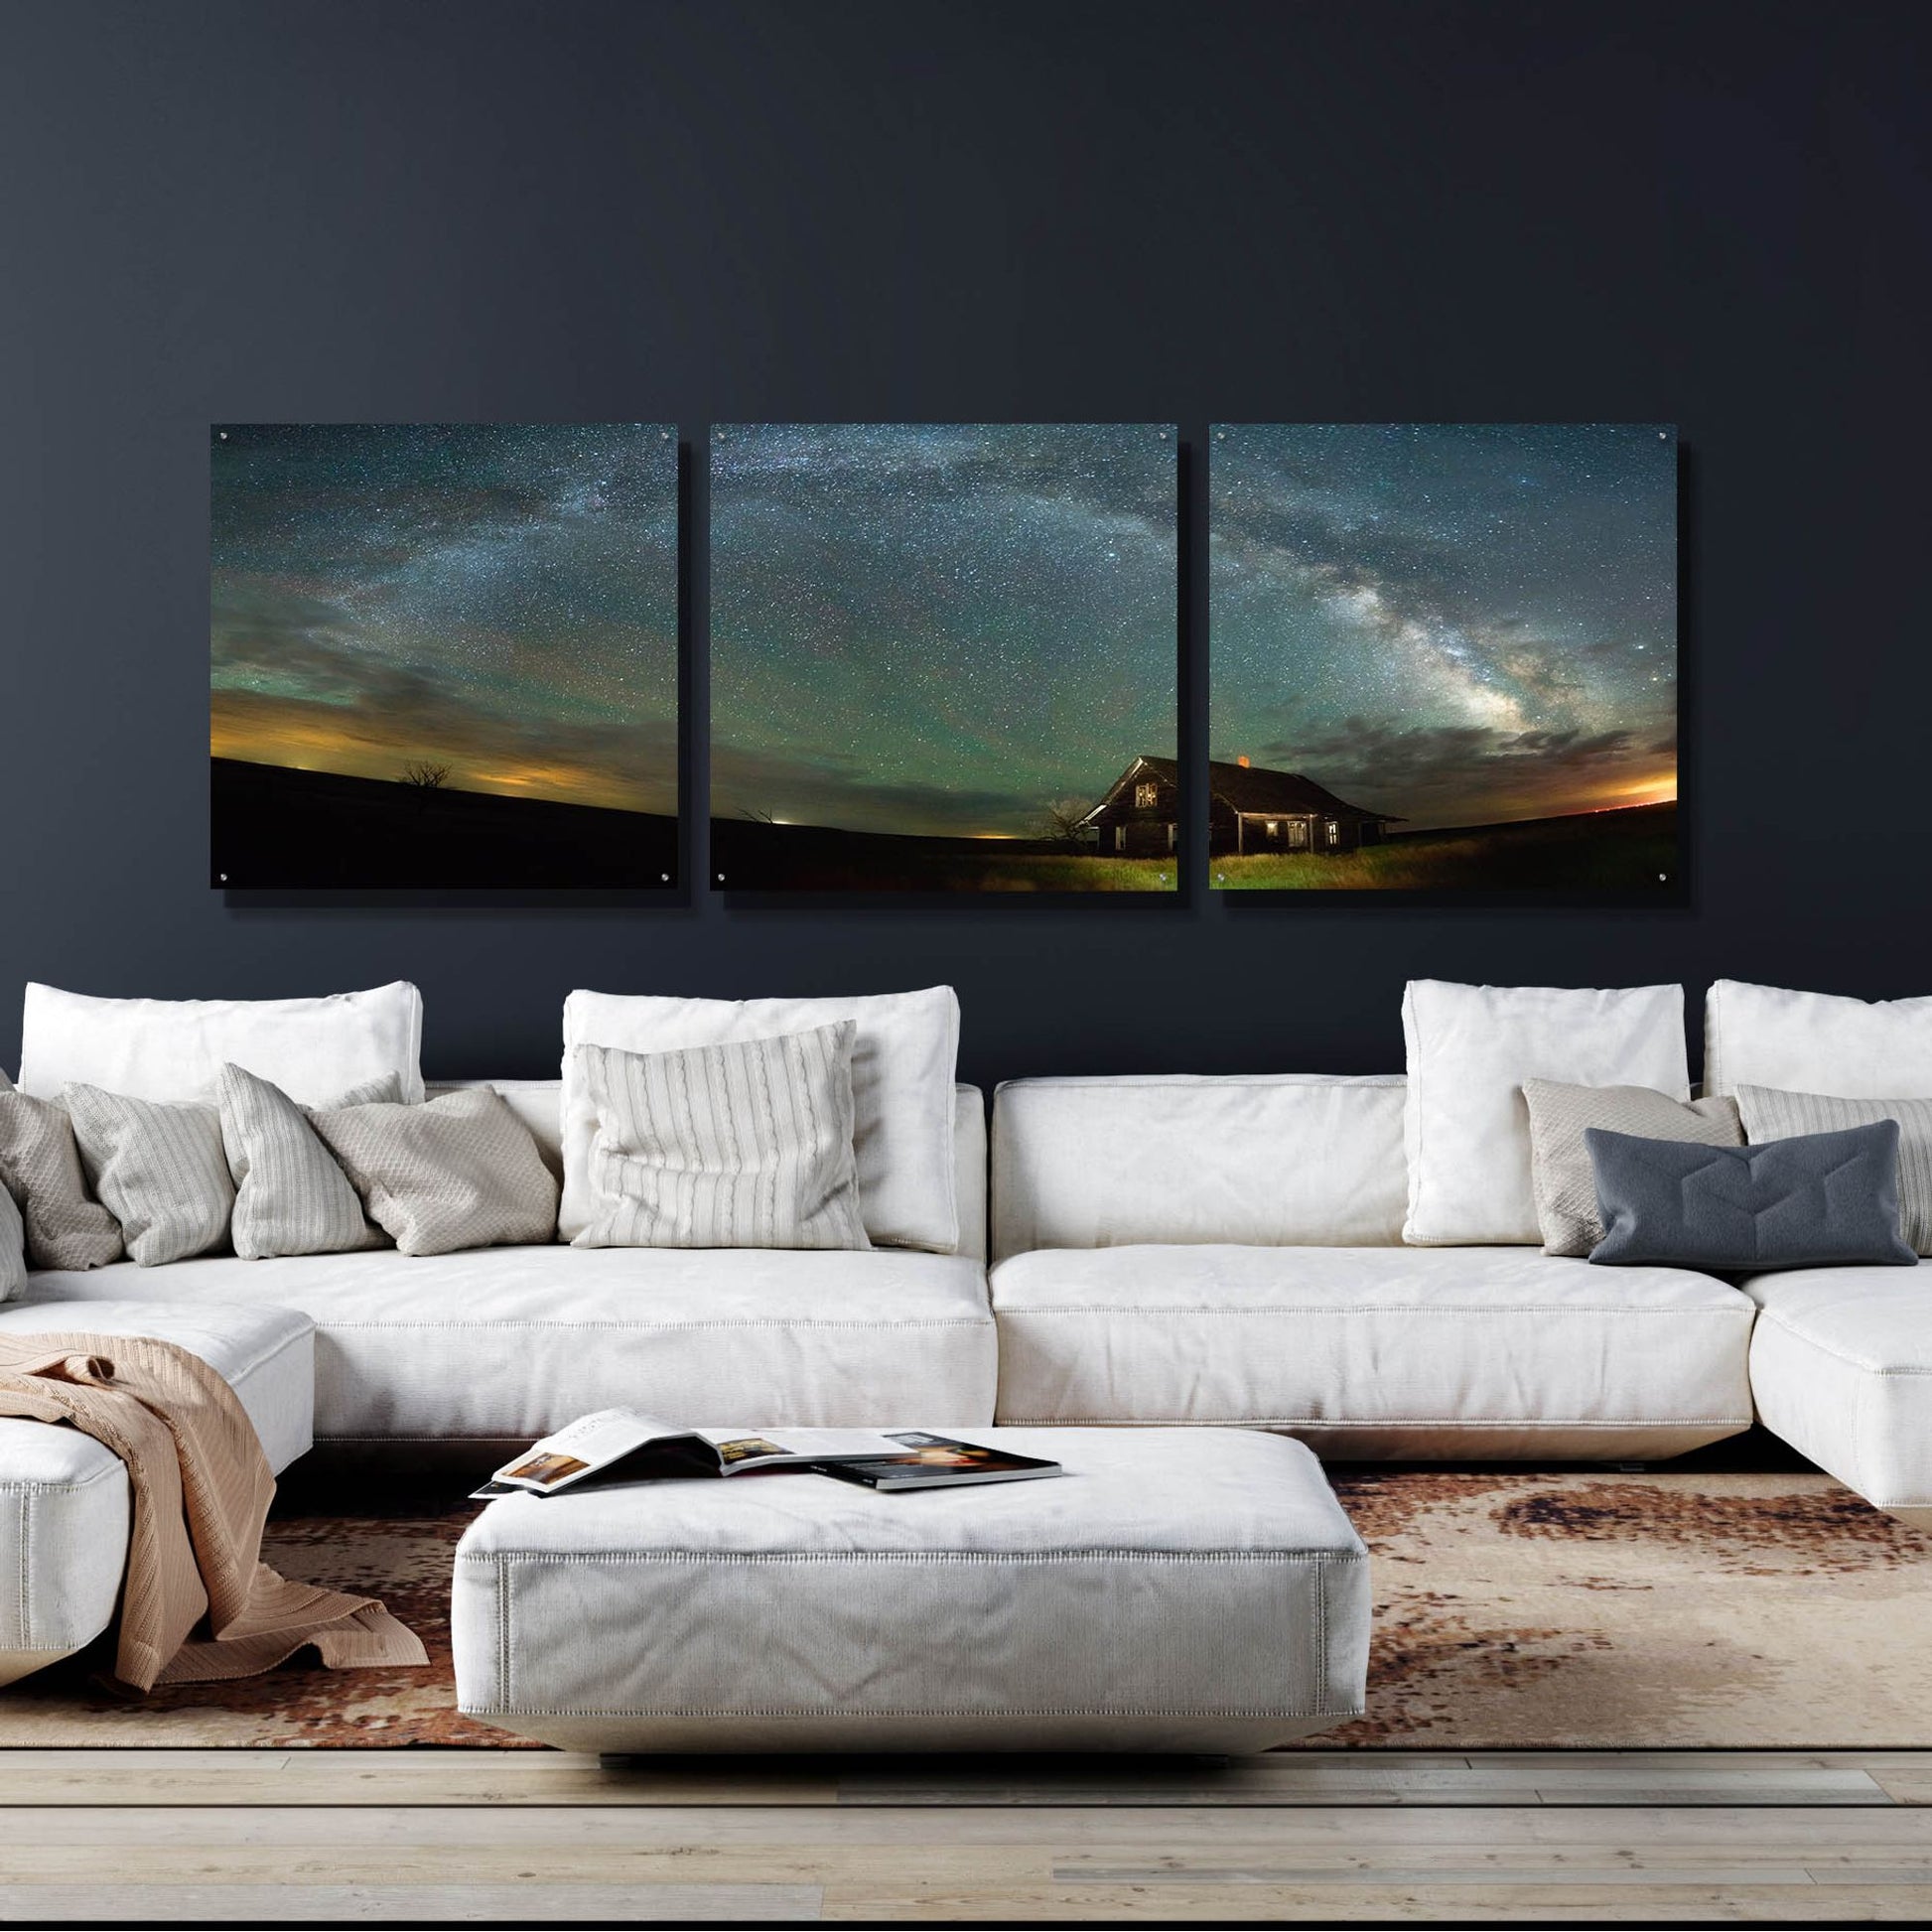 Epic Art 'Abandoned on the Plains' by Darren White, Acrylic Glass Wall Art, 3 Piece Set,108x36